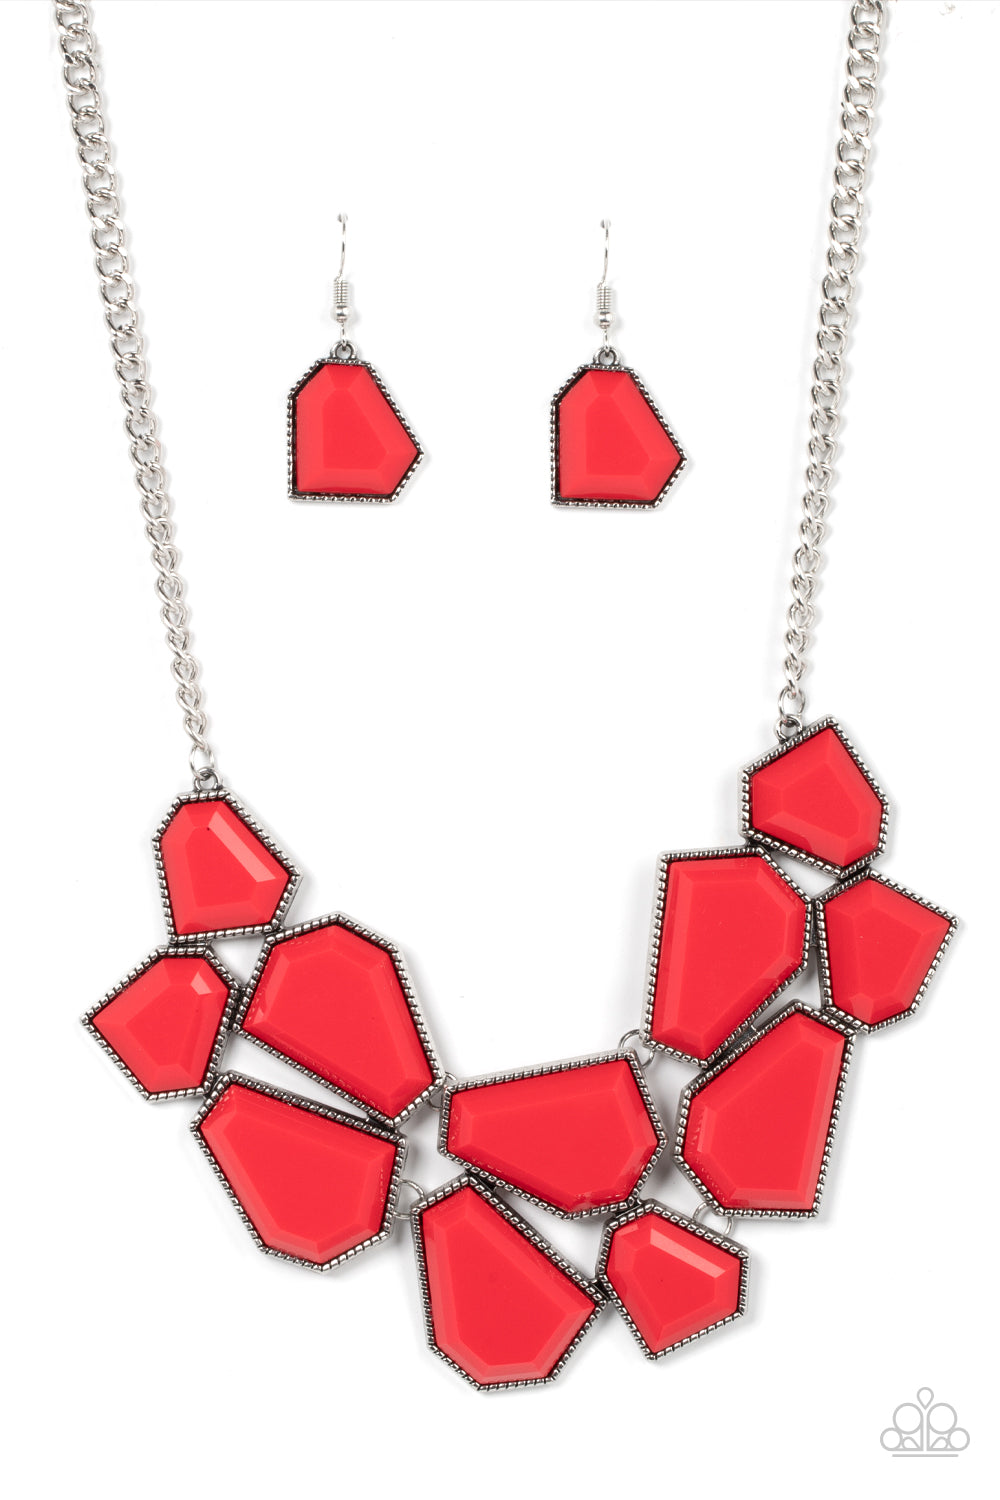 Double-DEFACED - Red Necklaces a collection of flamboyant red defaced beads are encased in studded silver frames which link together across the collar. The irregular-shaped designs, suspended from silver chains, make a dynamically striking statement. Features an adjustable clasp closure.  Sold as one individual necklace. Includes one pair of matching earrings.